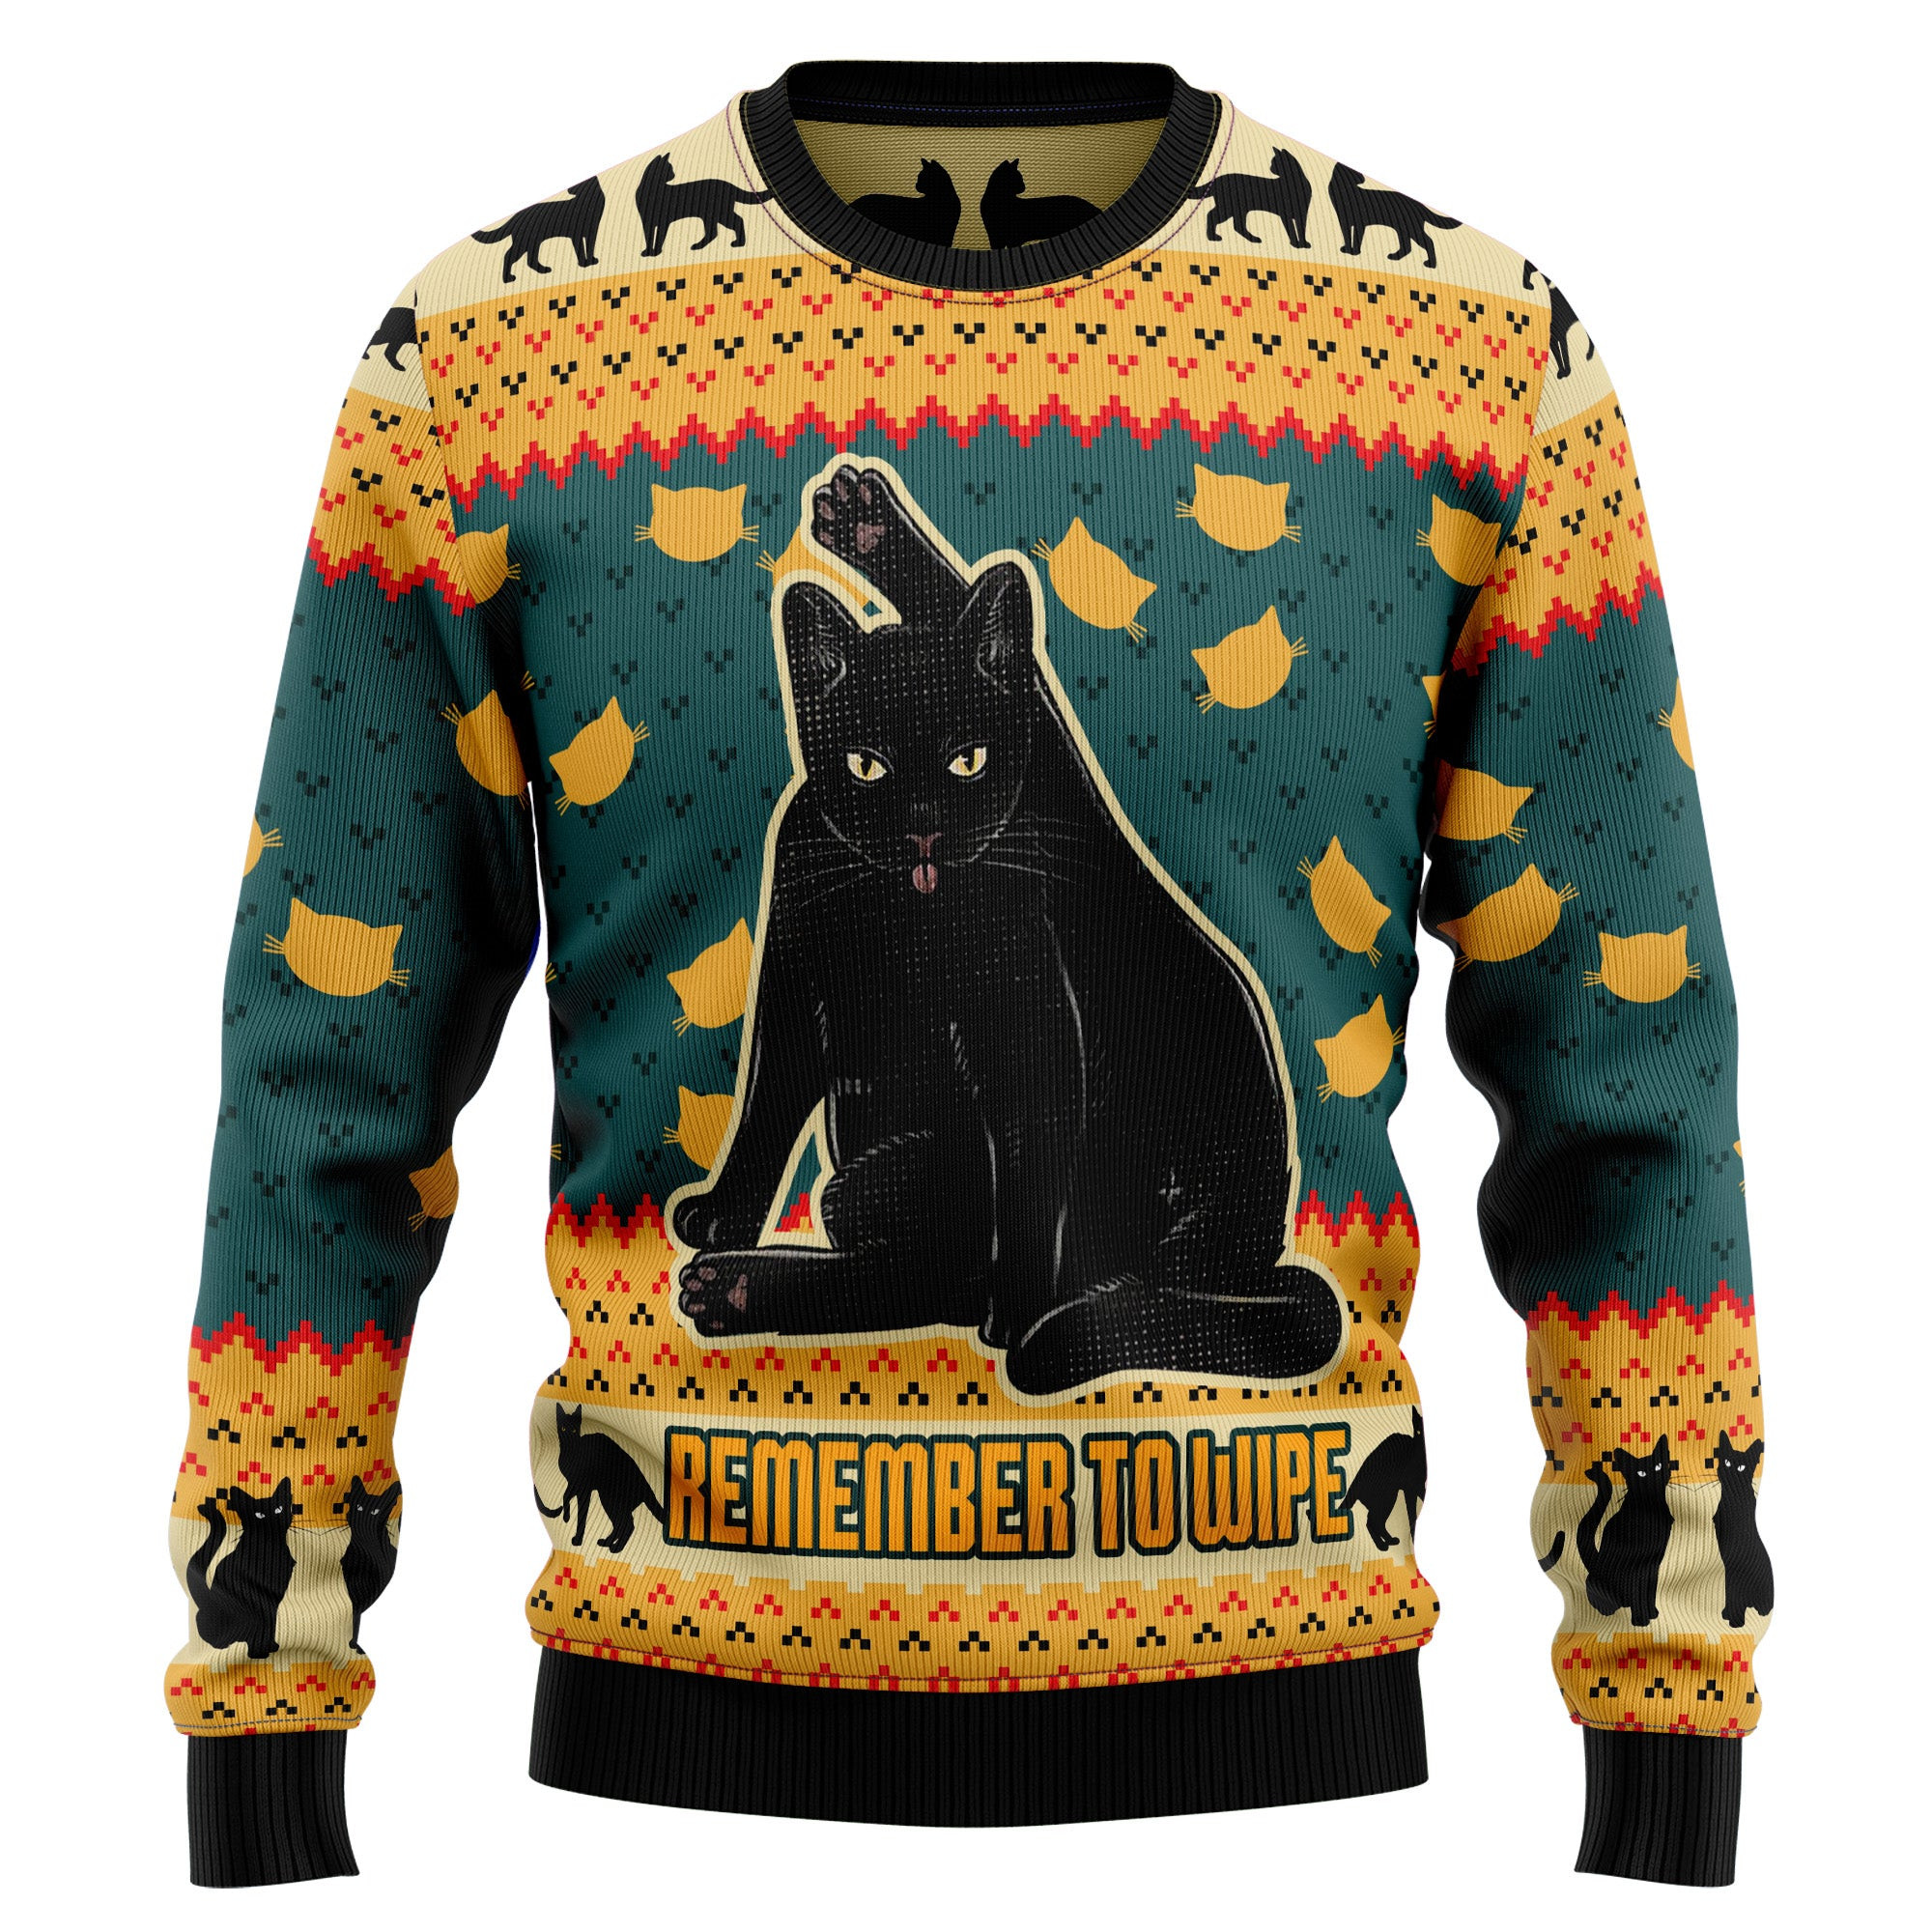 Black Cat Ugly Christmas Sweater, Ugly Sweater For Men Women, Holiday Sweater